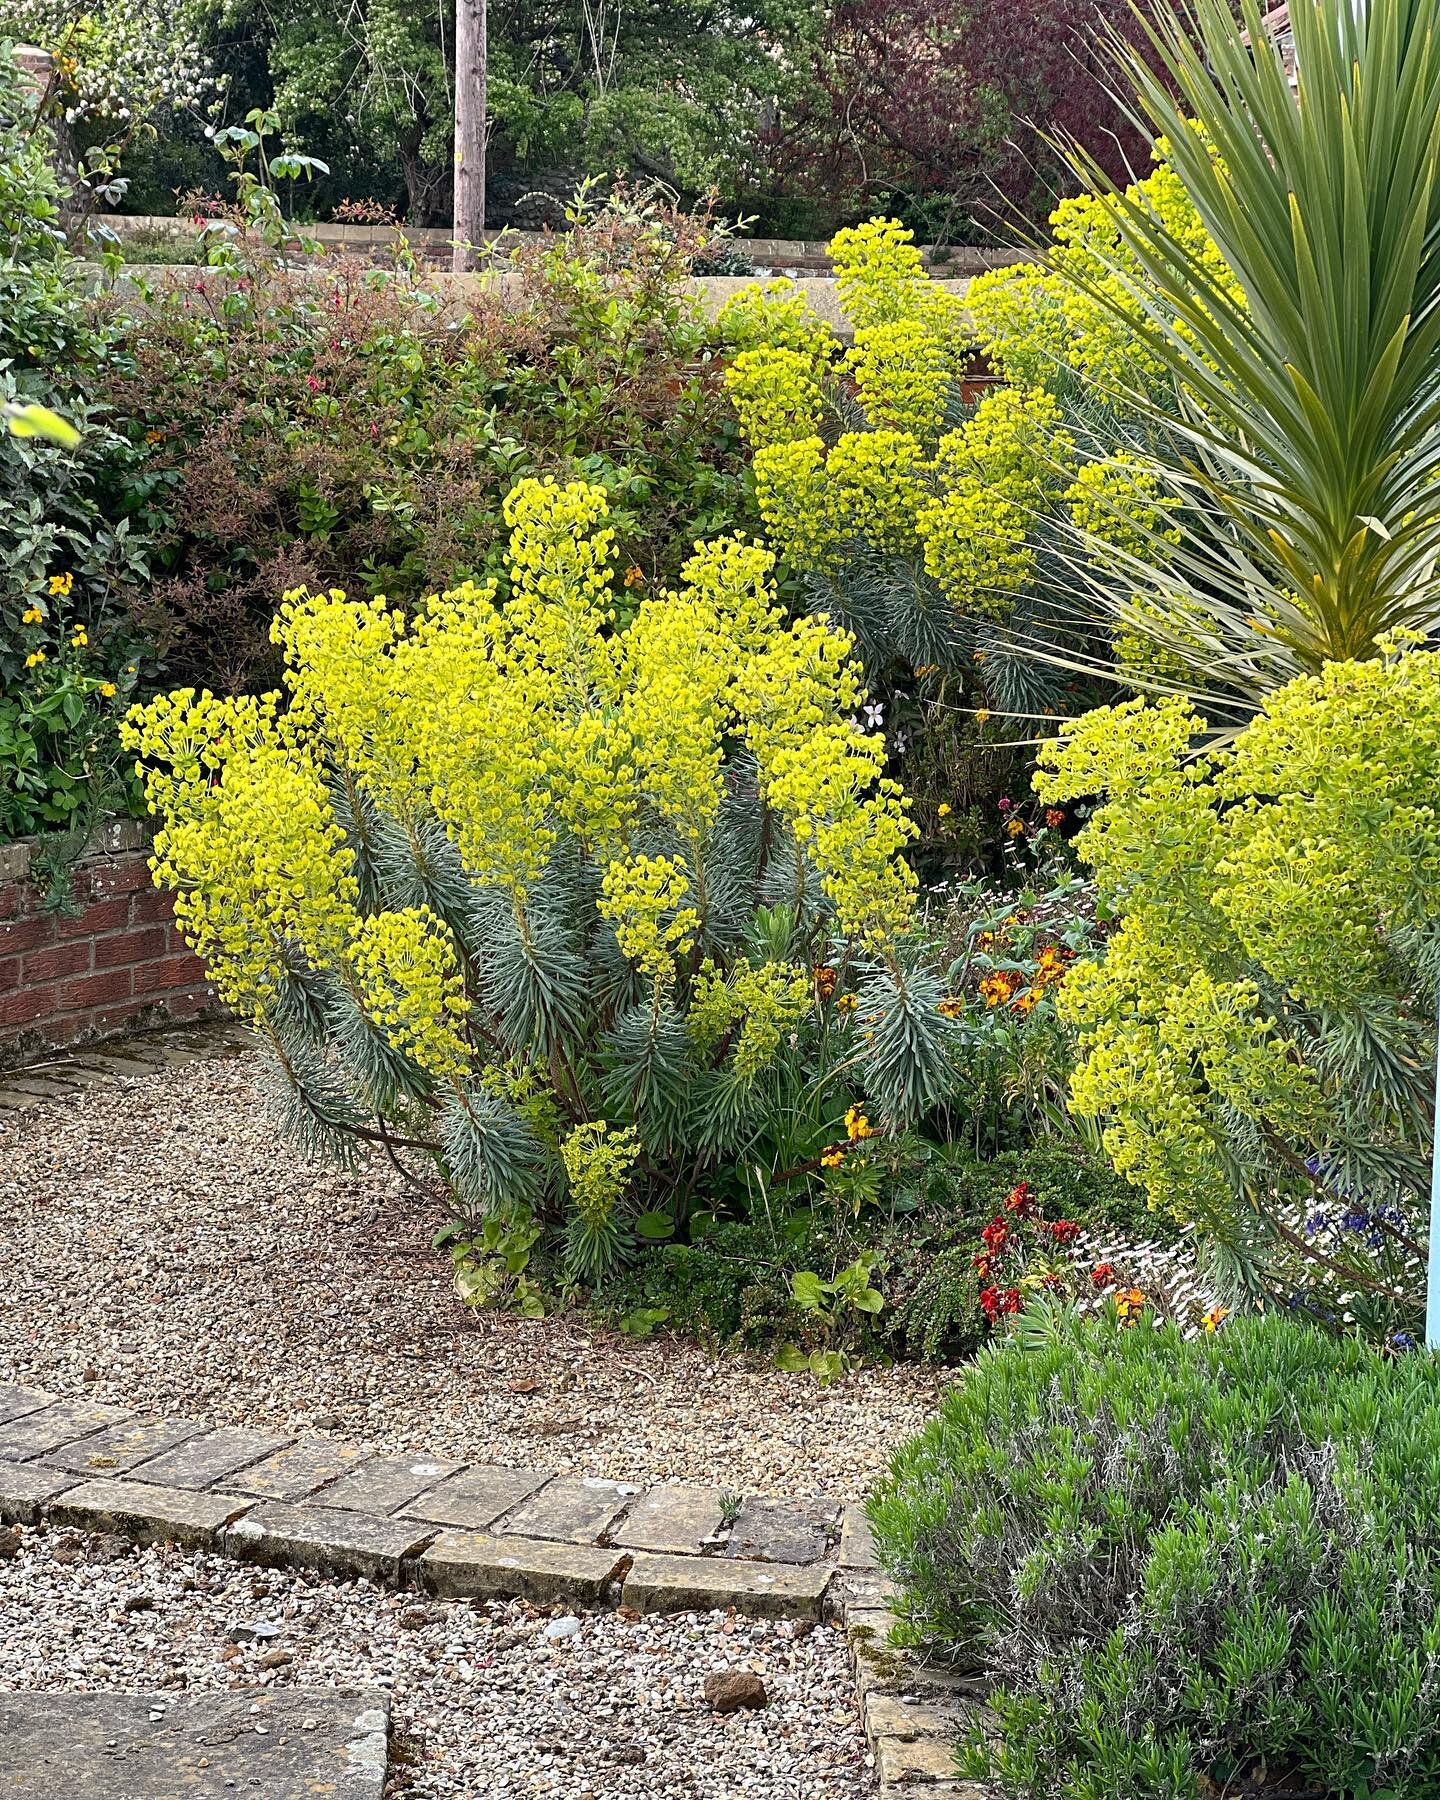 150 species of Euphorbia tolerate the British climate. Such versatile plants, great for impact, height, structure and most varieties are low maintenance. 

Which are your favourites?

1. E. characias 
2. E. Shillingii 
3. E. Oblongata 
4. E. Sikkimen